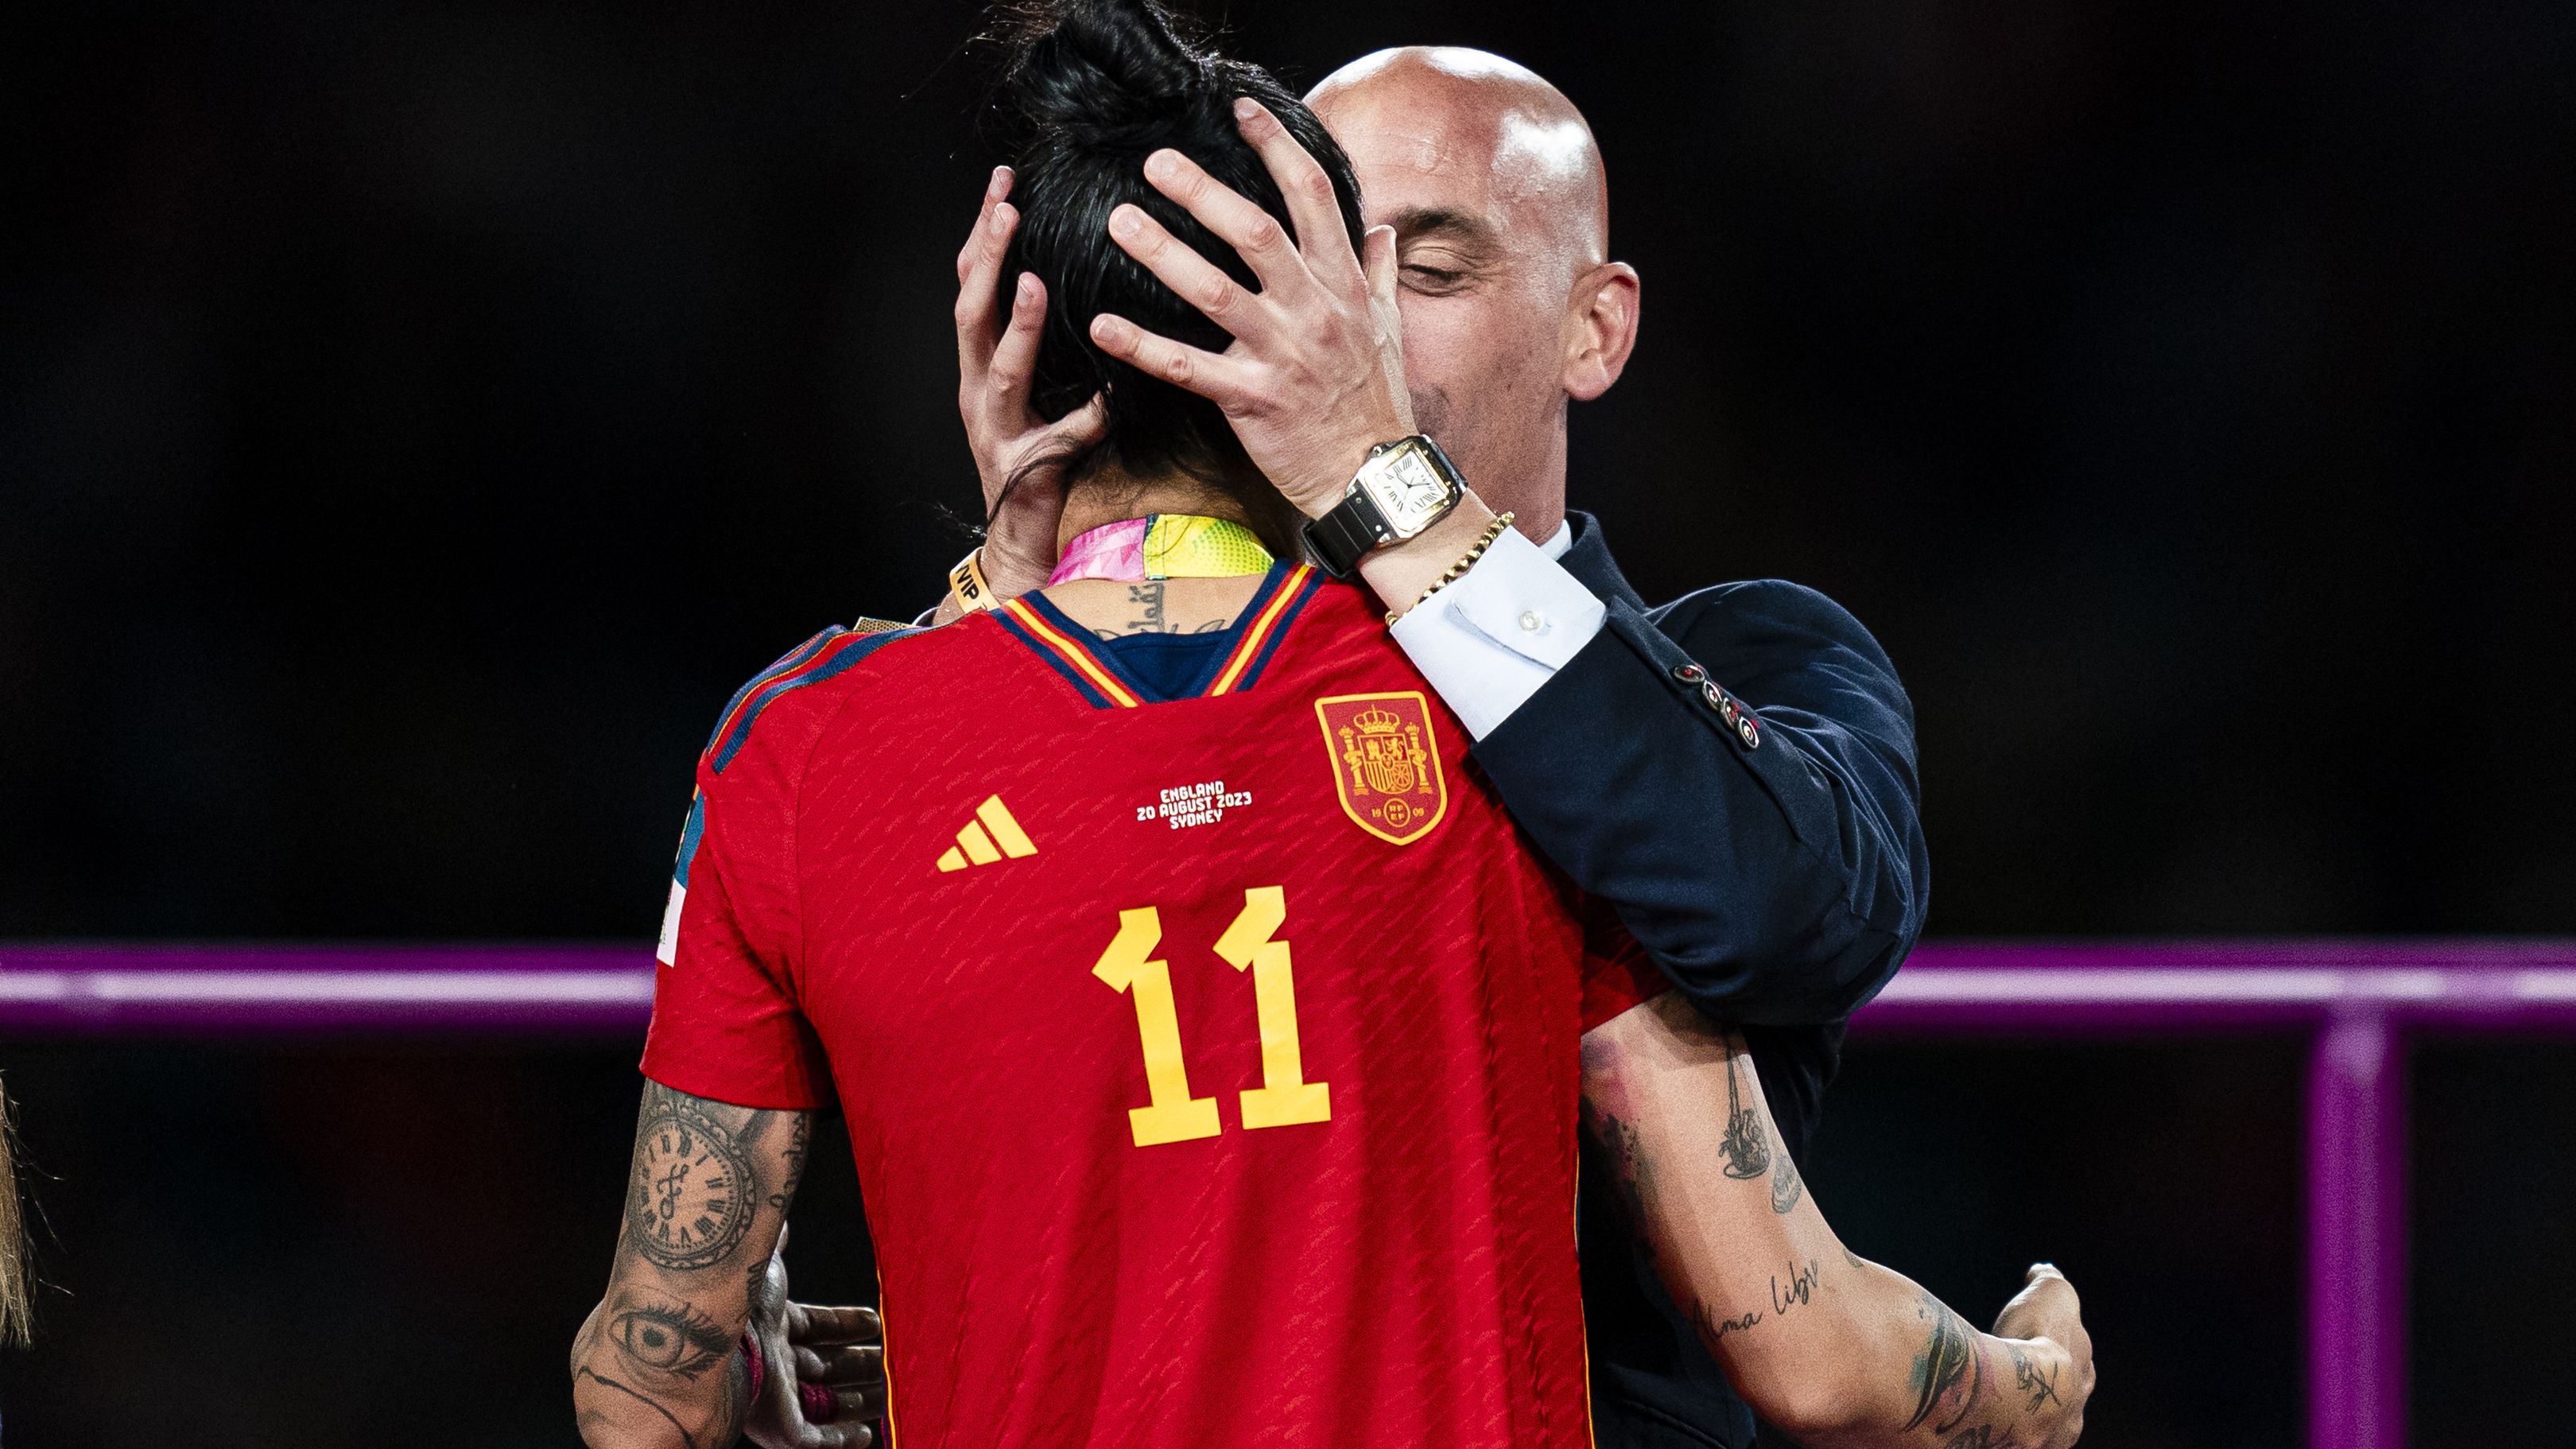 Luis Rubiales kisses Jennifer Hermoso during the medal ceremony.